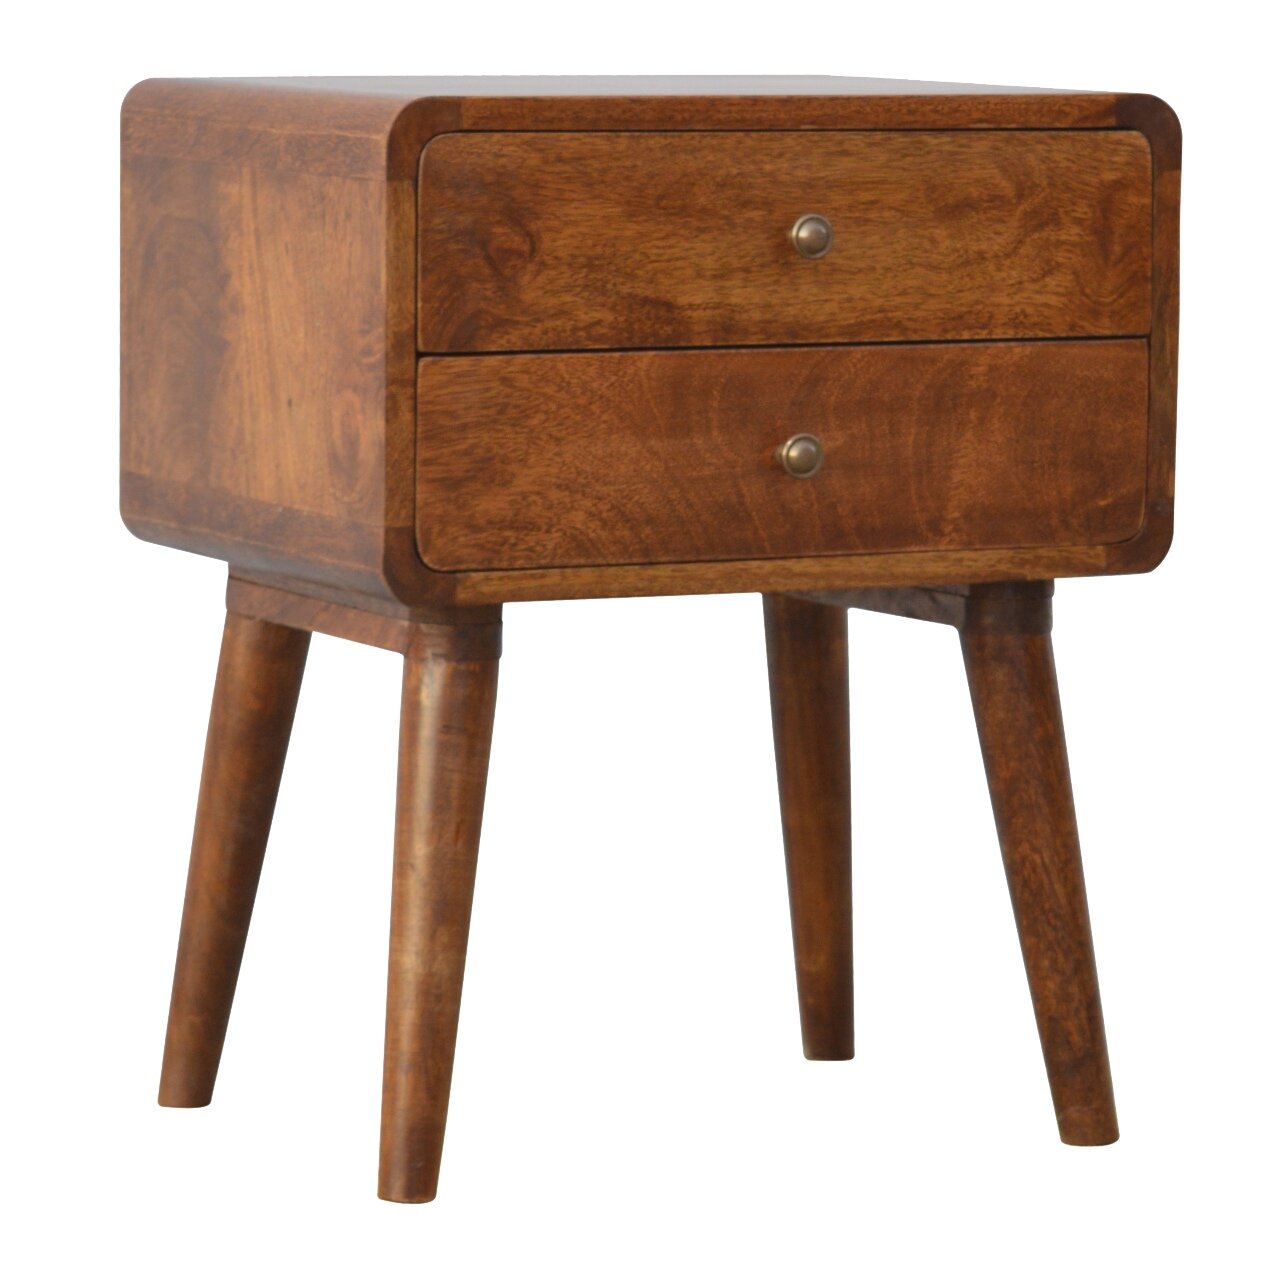 Firger Solid Wood Bedside Table